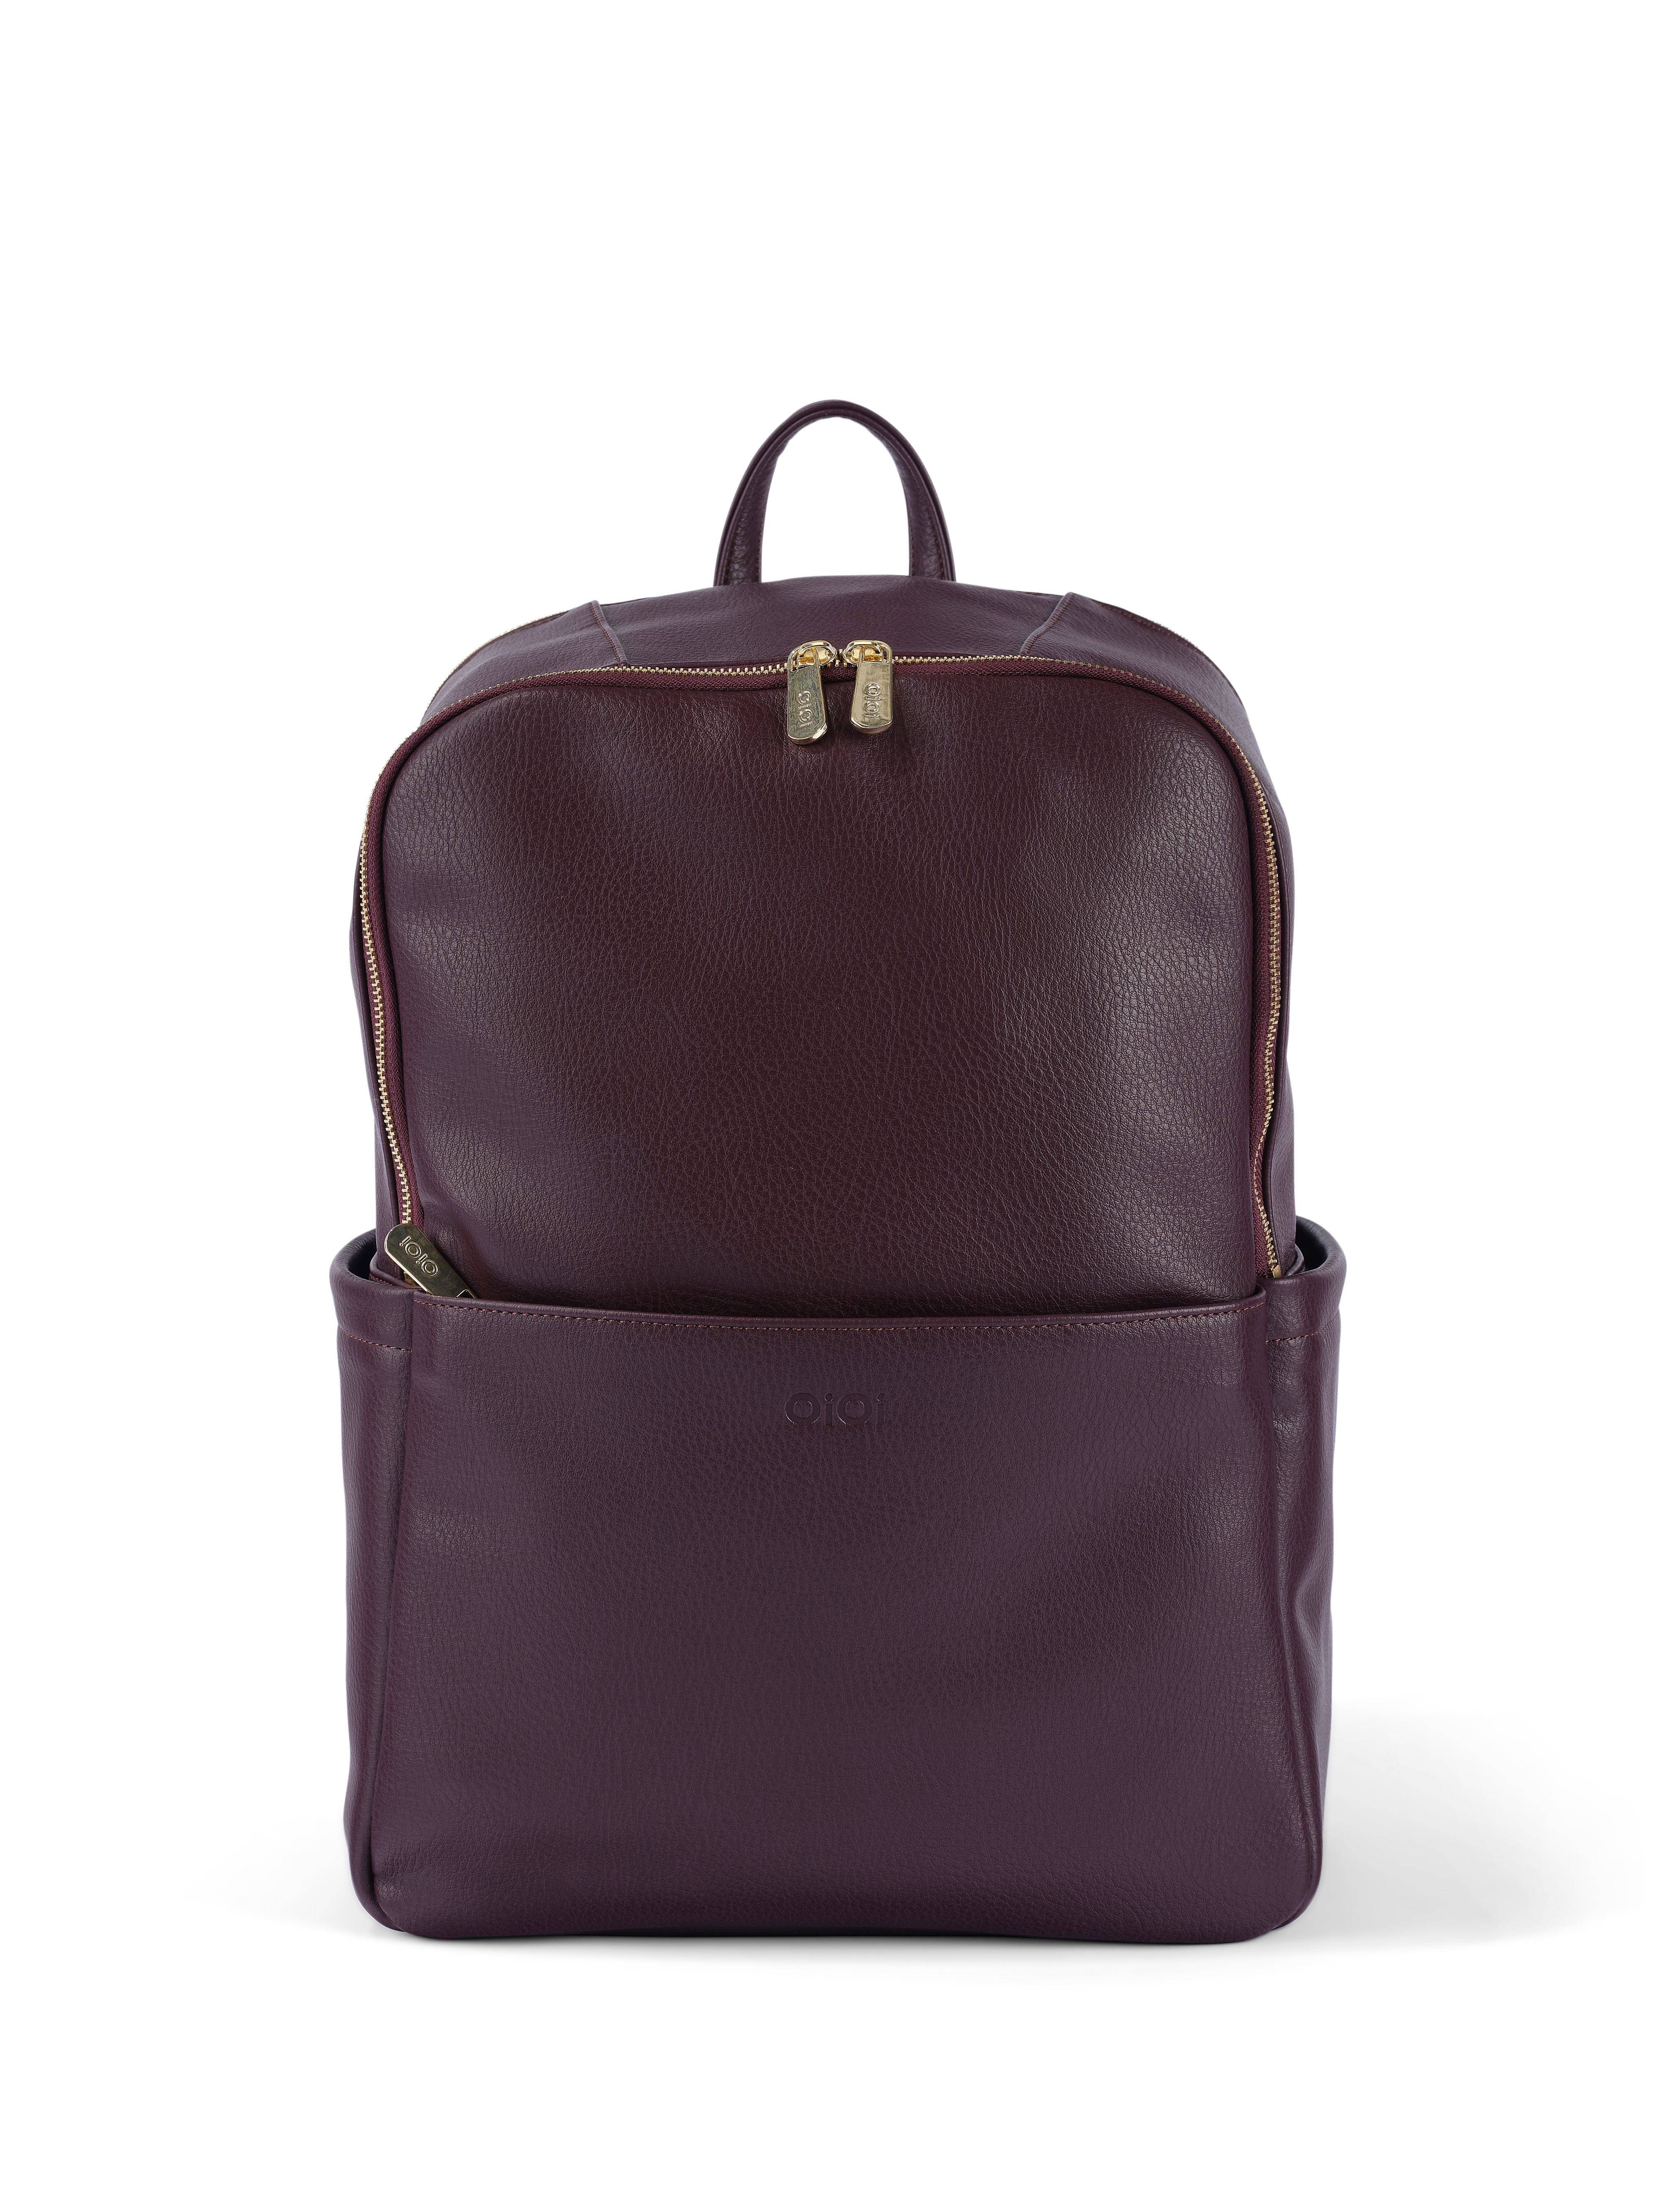 OiOi Multitasker Nappy Backpack Mulberry Faux Leather